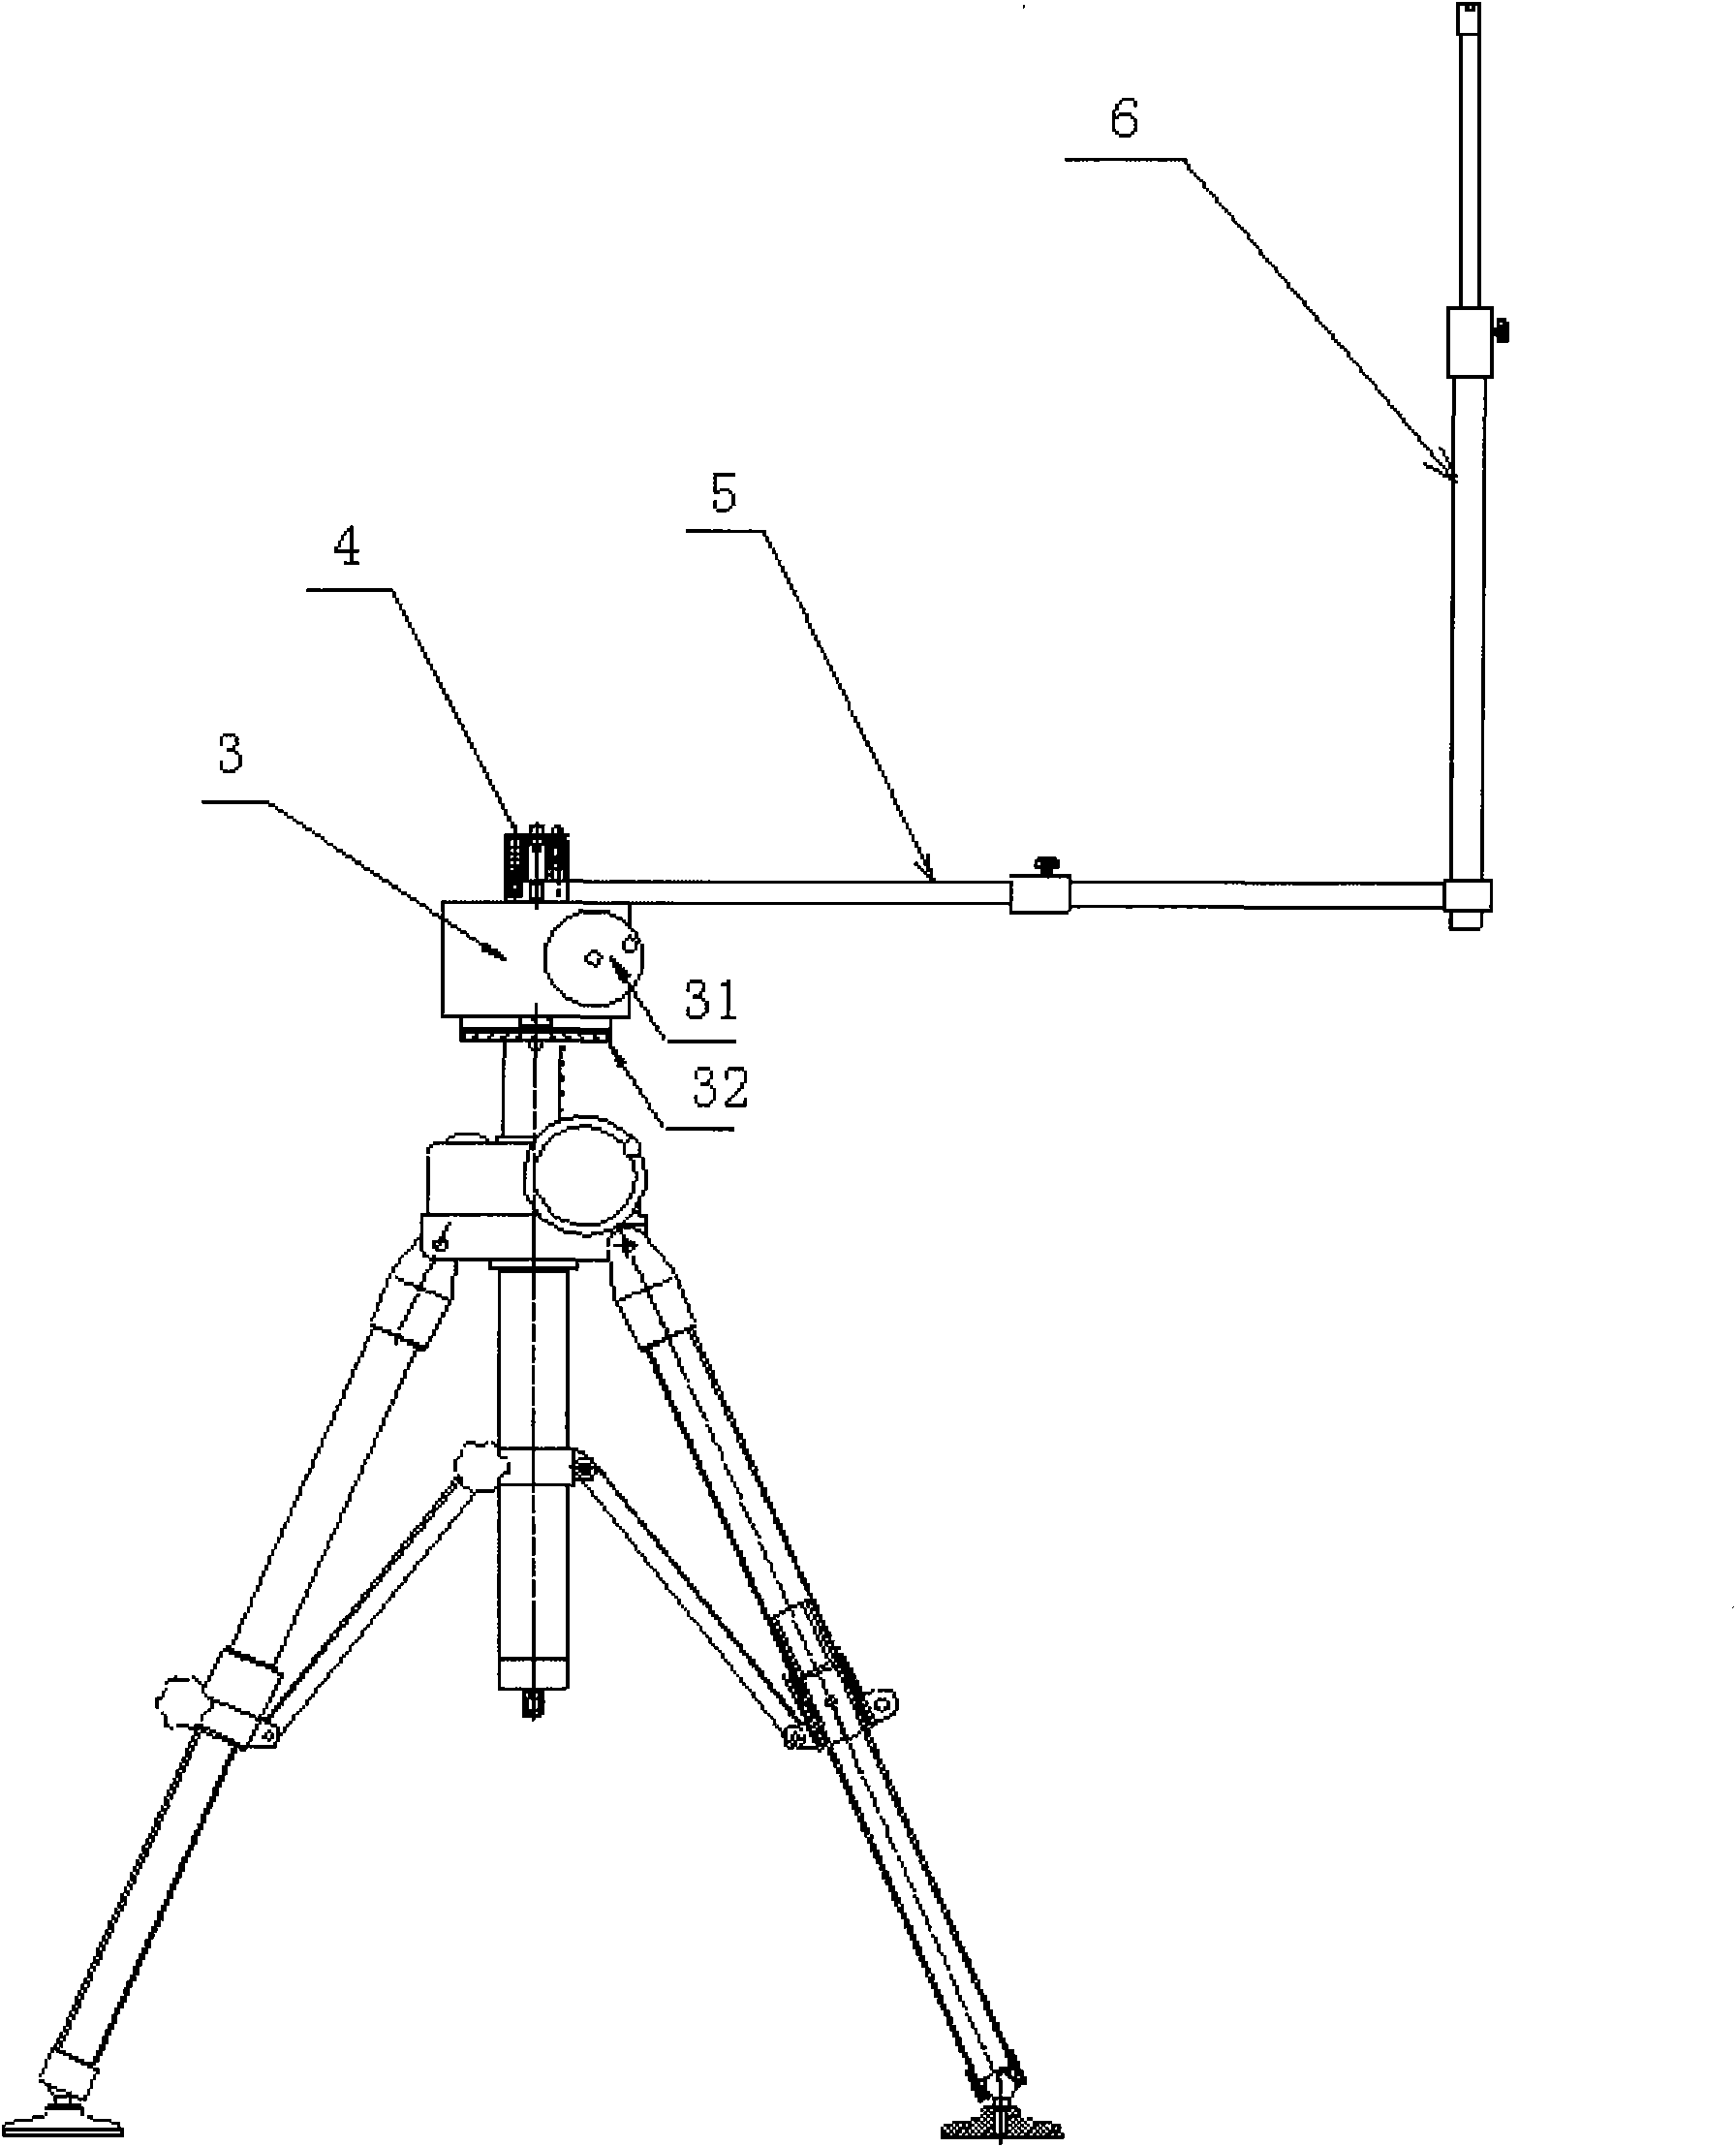 Airplane external illuminating space angle-positioning combining equipment